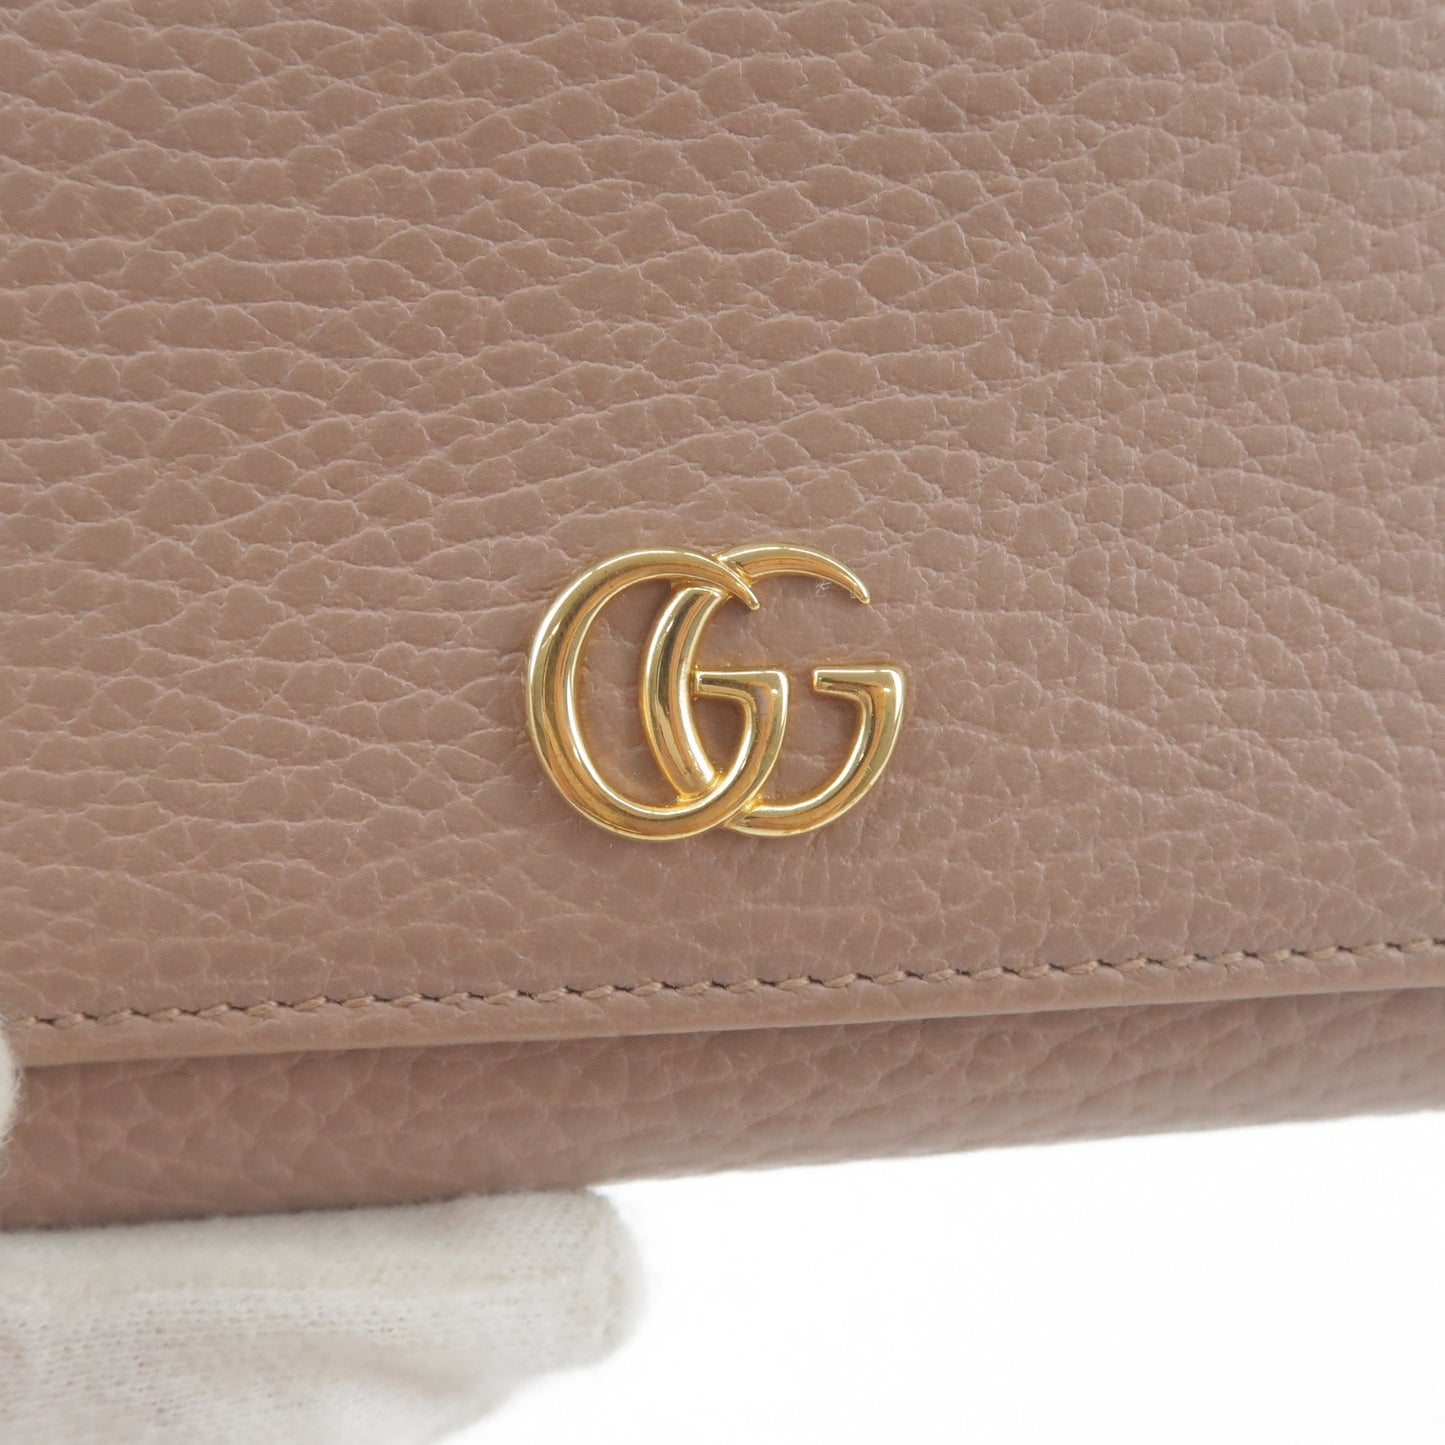 GUCCI GG Mermont Leather Small Wallet Pink Beige 474746